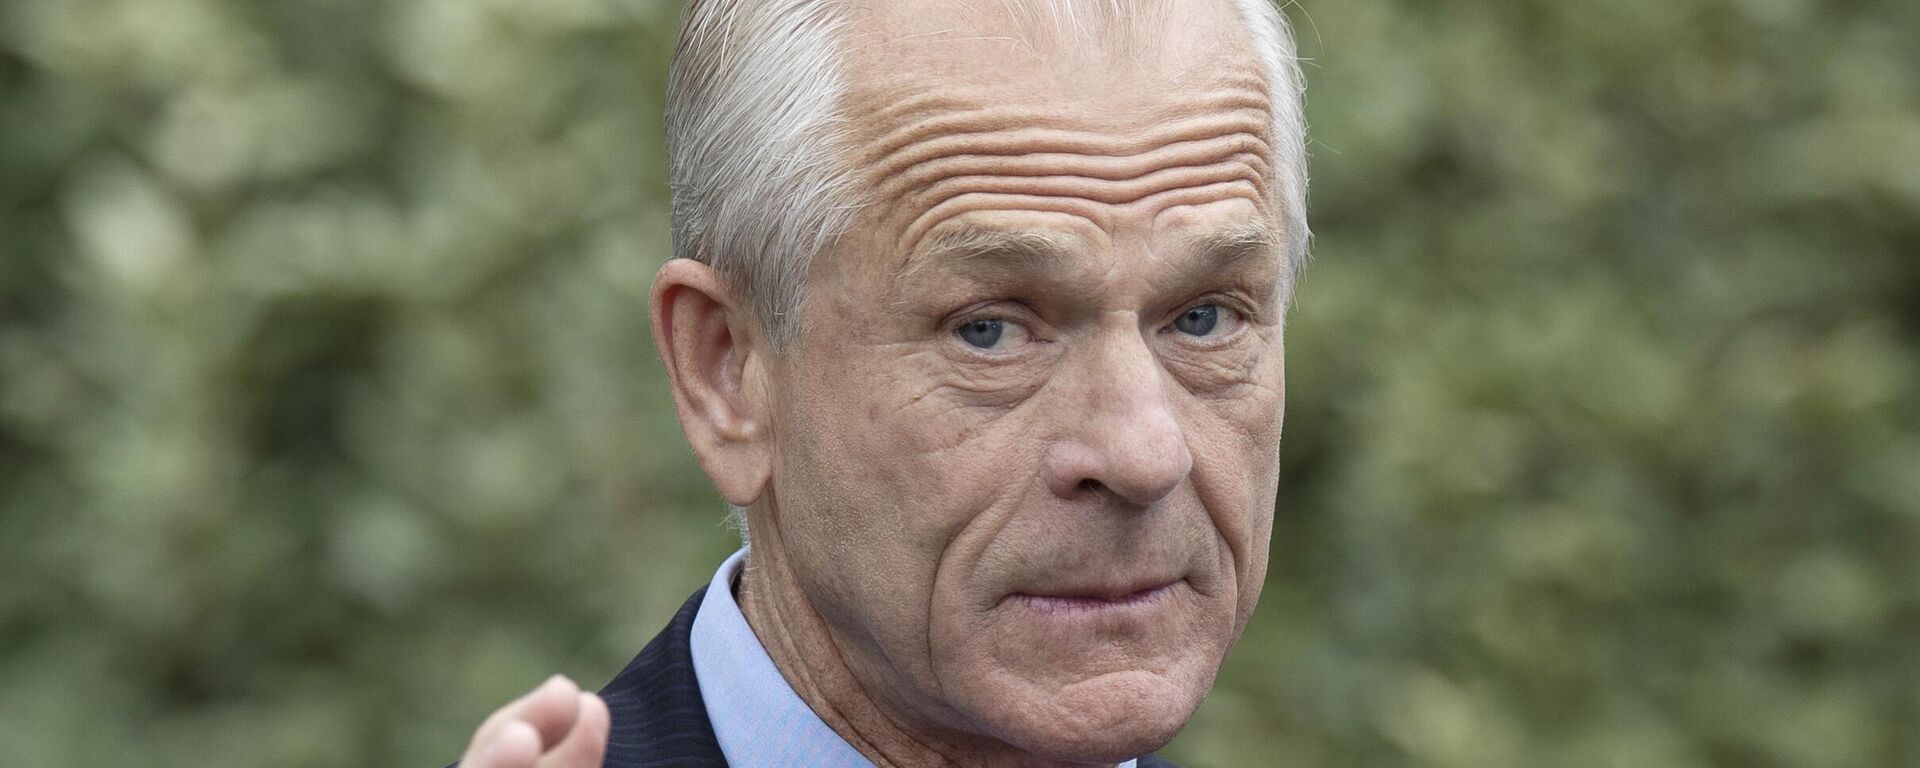 White House trade adviser Peter Navarro speaks with reporters at the White House, June 18, 2020, in Washington. The House committee investigating the Capitol riot has set a vote for next week to consider contempt of Congress charges for two aides of former President Donald Trump. The committee will meet Monday to discuss whether to recommend referring for potential prosecution Trump’s former trade adviser, Peter Navarro, and Dan Scavino, the onetime chief of staff for communications.  - Sputnik International, 1920, 03.06.2022